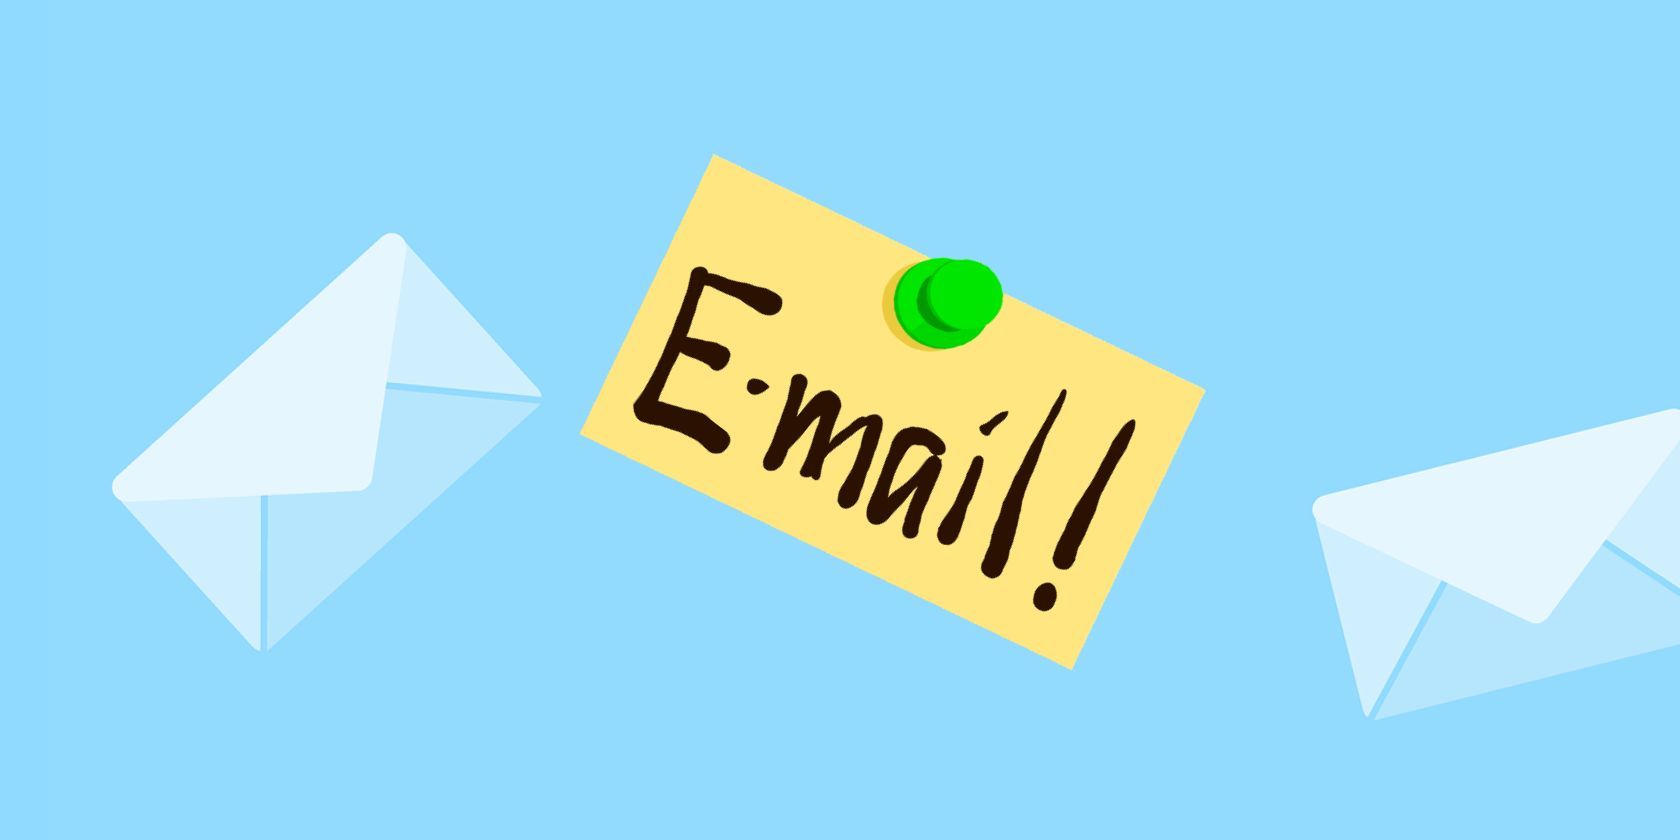 An illustration of email in transit